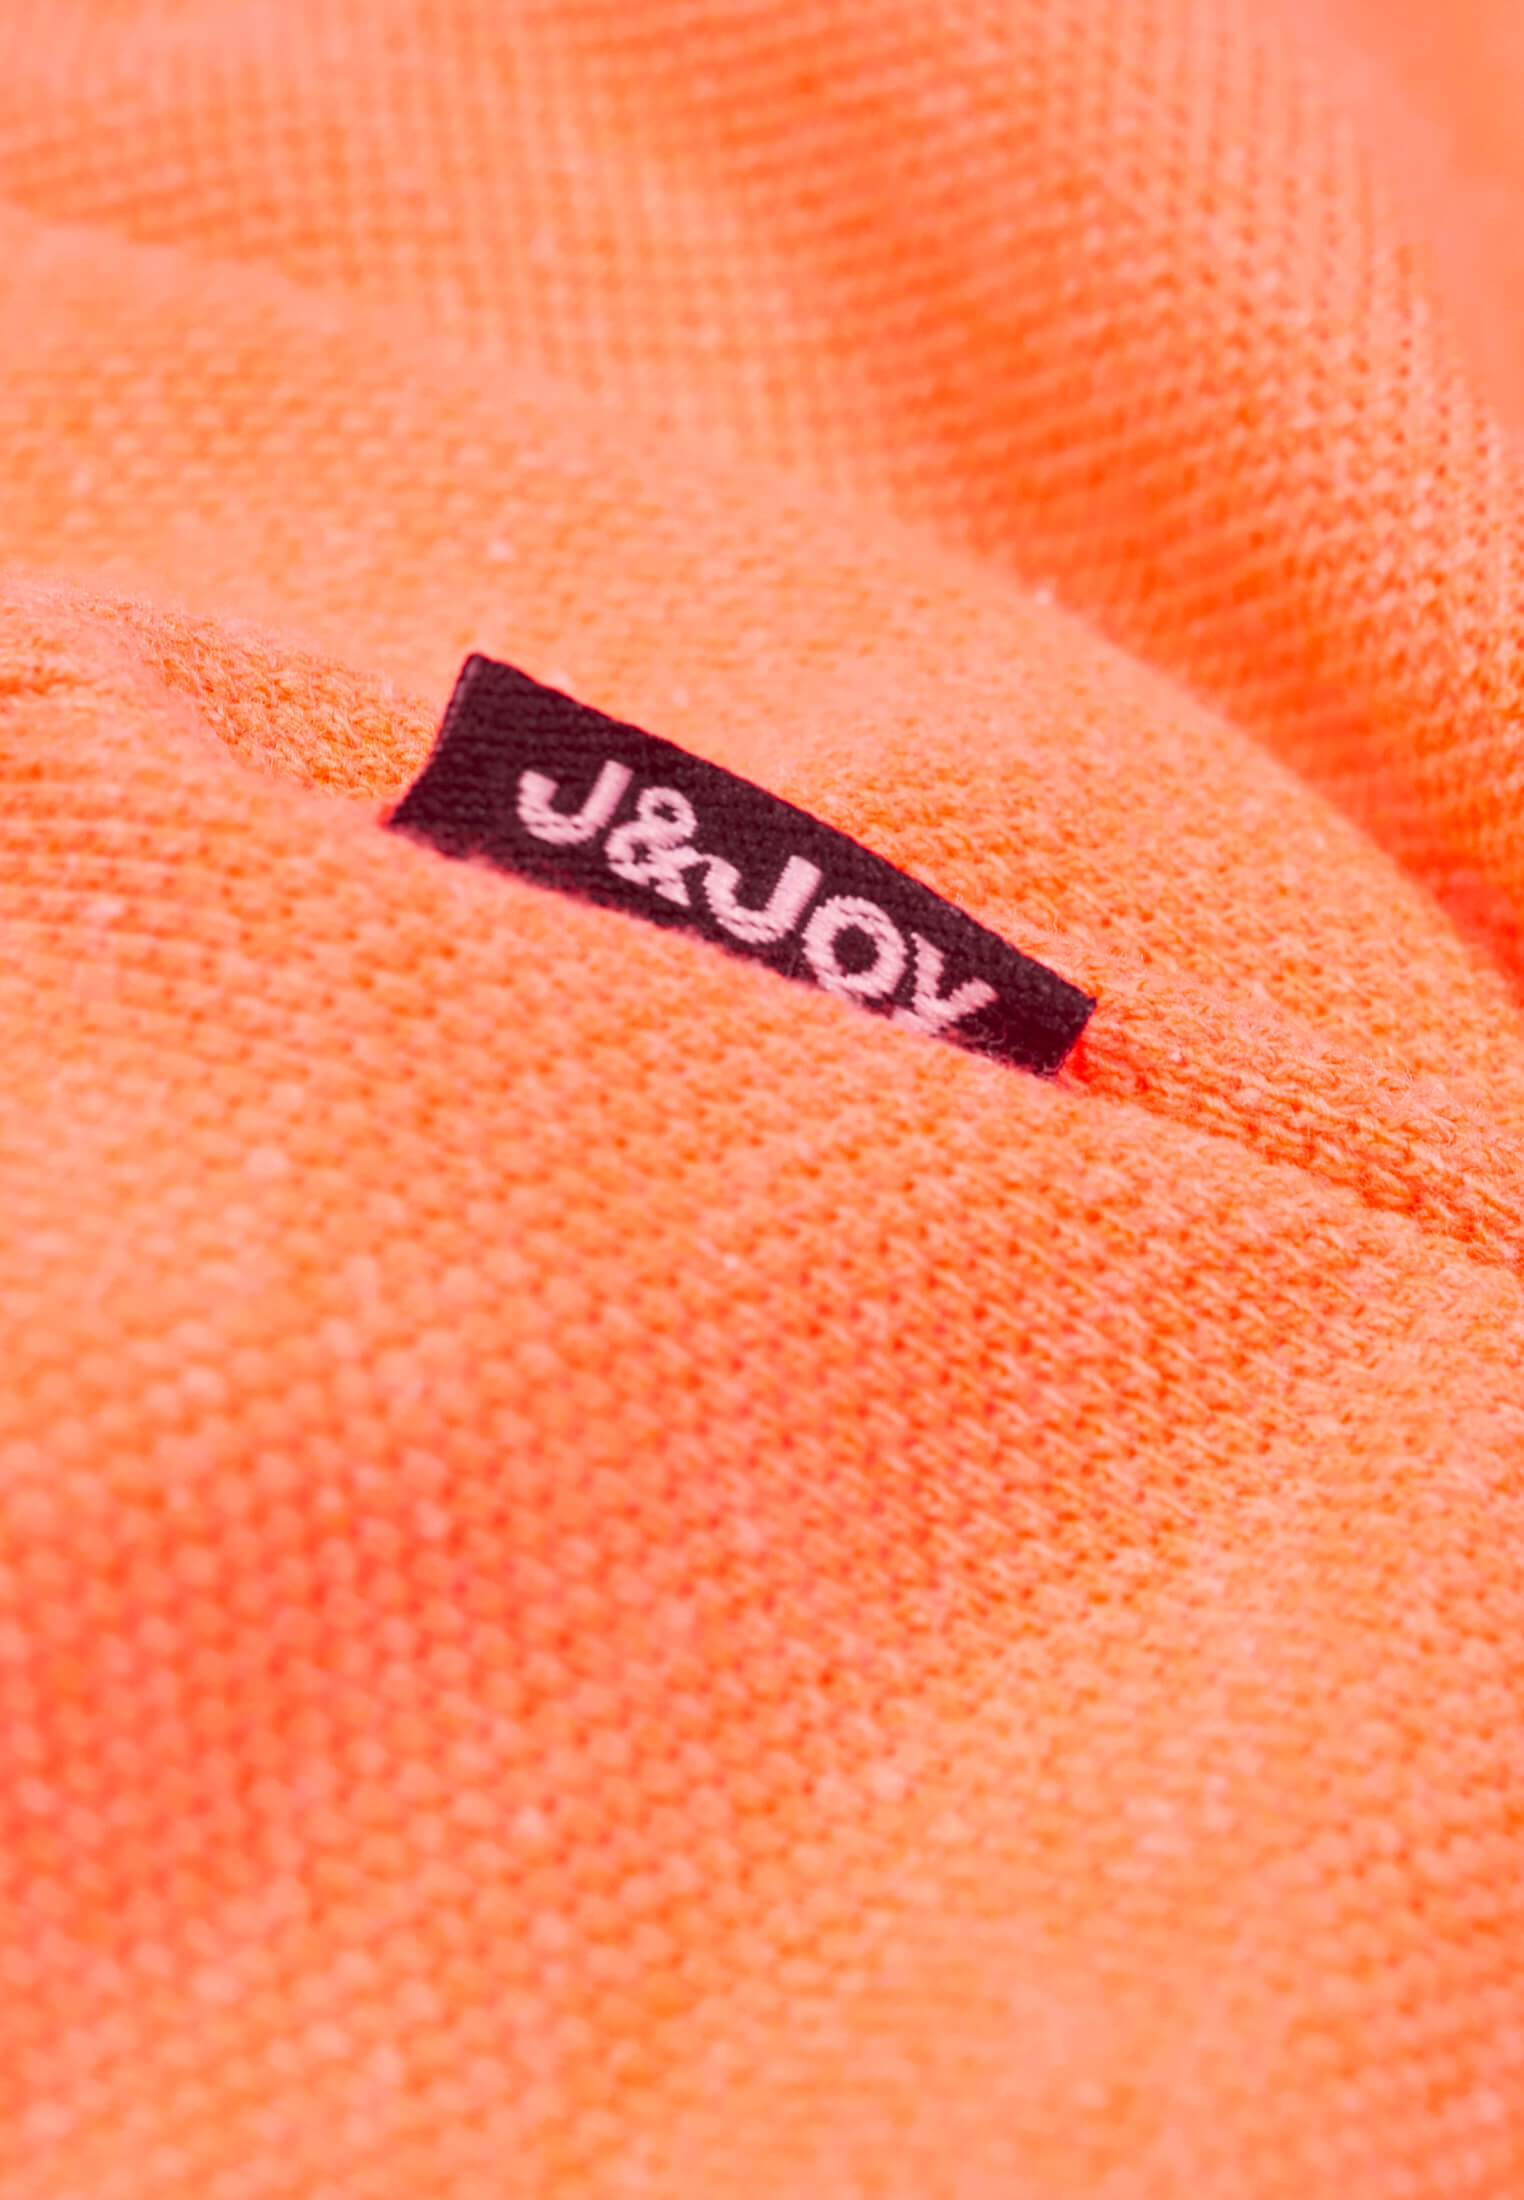 Polo Essentials Homme 23 Coral Fiery | J&JOY.